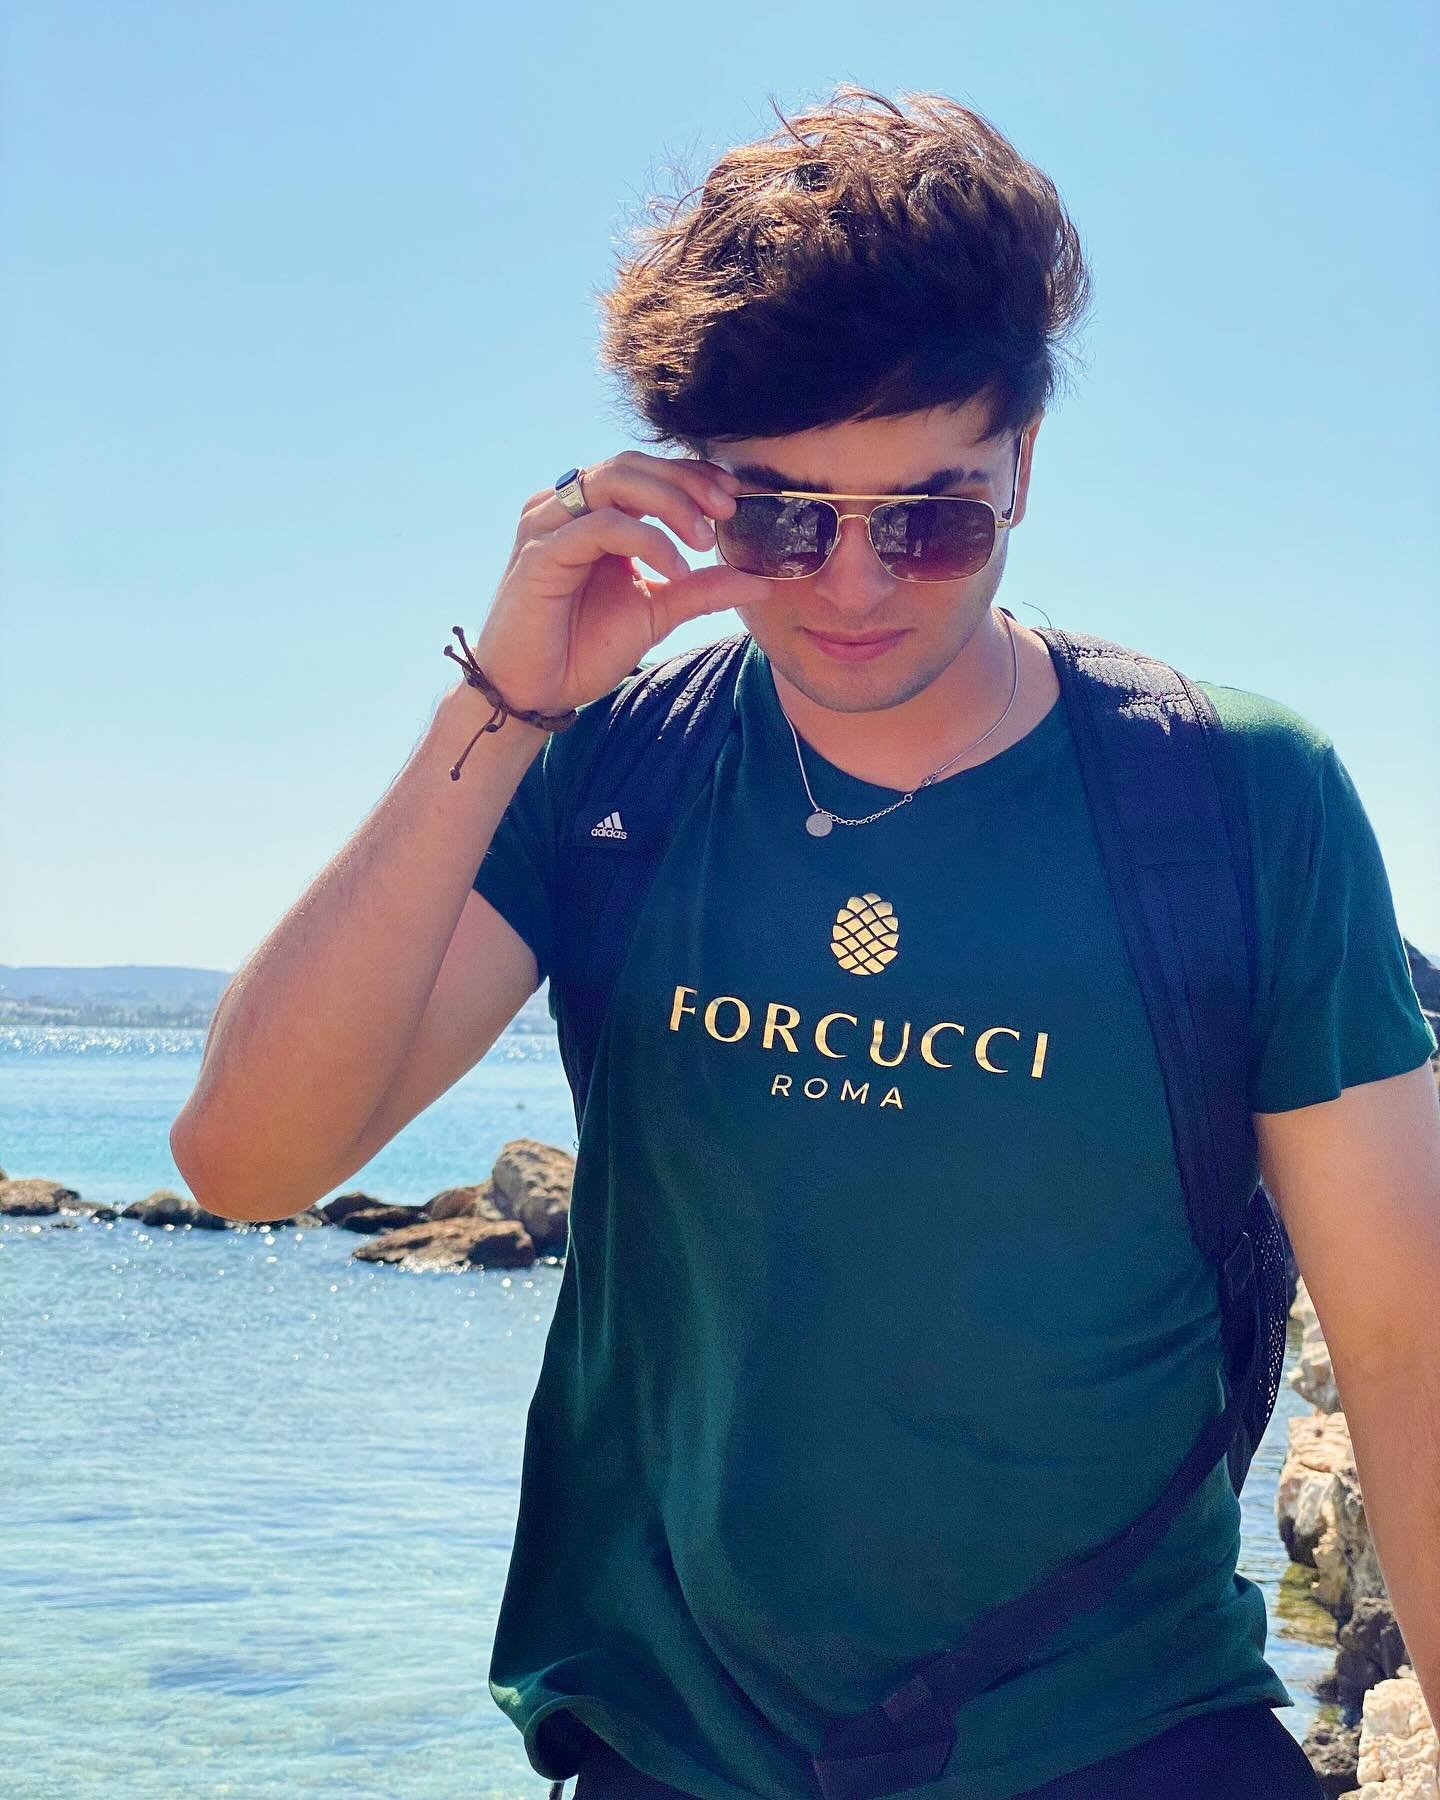 European summer on the way. 

Free shipping in April with code &ldquo;FREE&rdquo;

forcucci.co

#forcucci #beoriginal #paros #greece #streetwearbeast #streetwearculture #europe2024 #europeansummer #estate2024 #verano2024